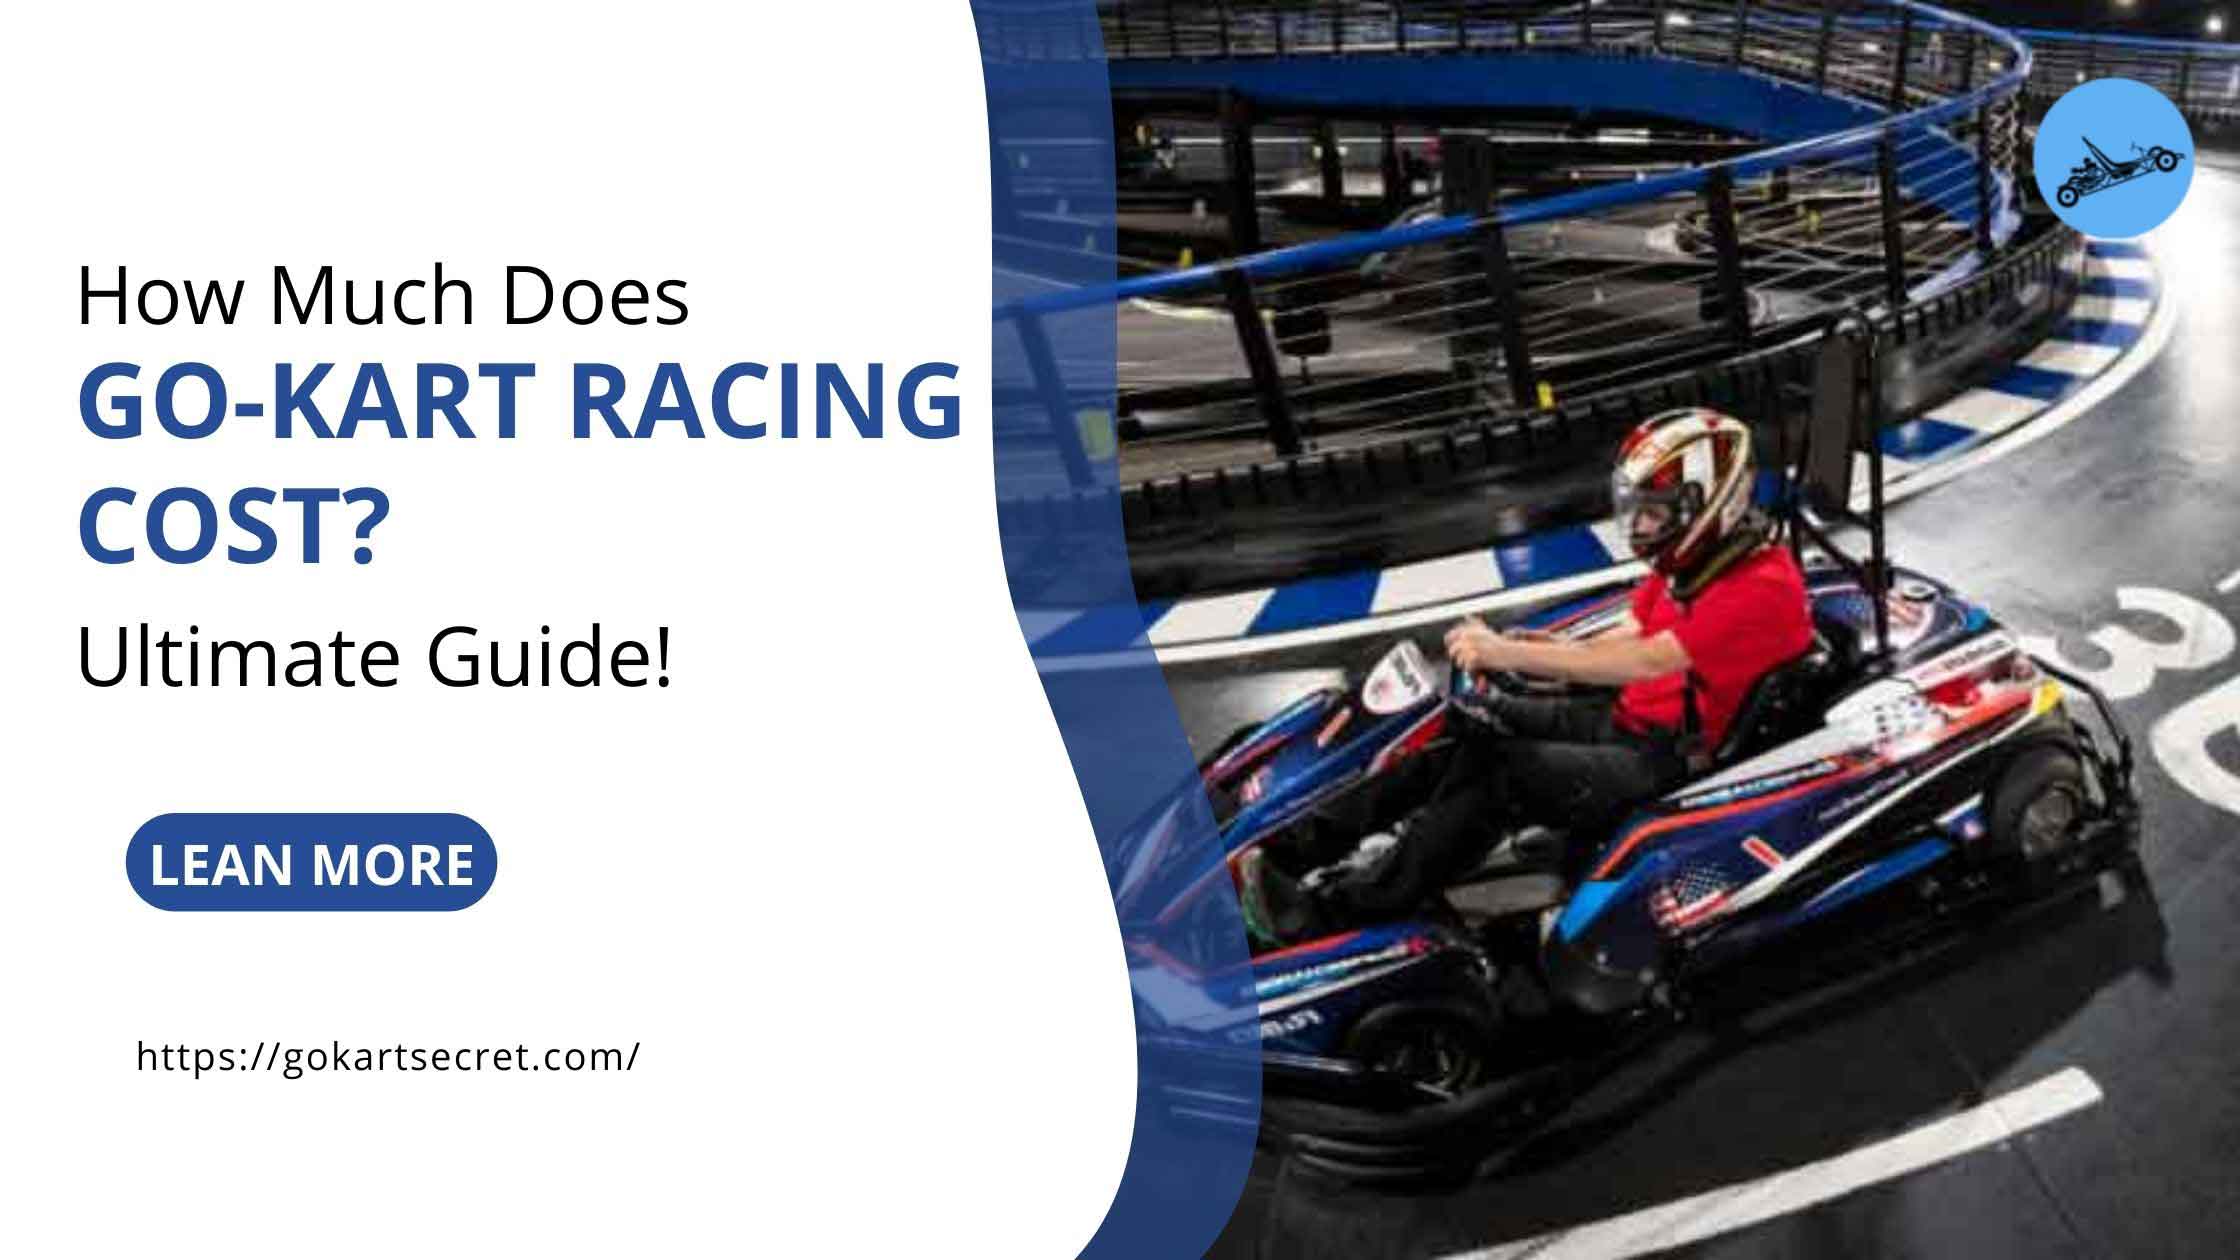 How Much Does Go-Kart Racing Cost? Ultimate Guide